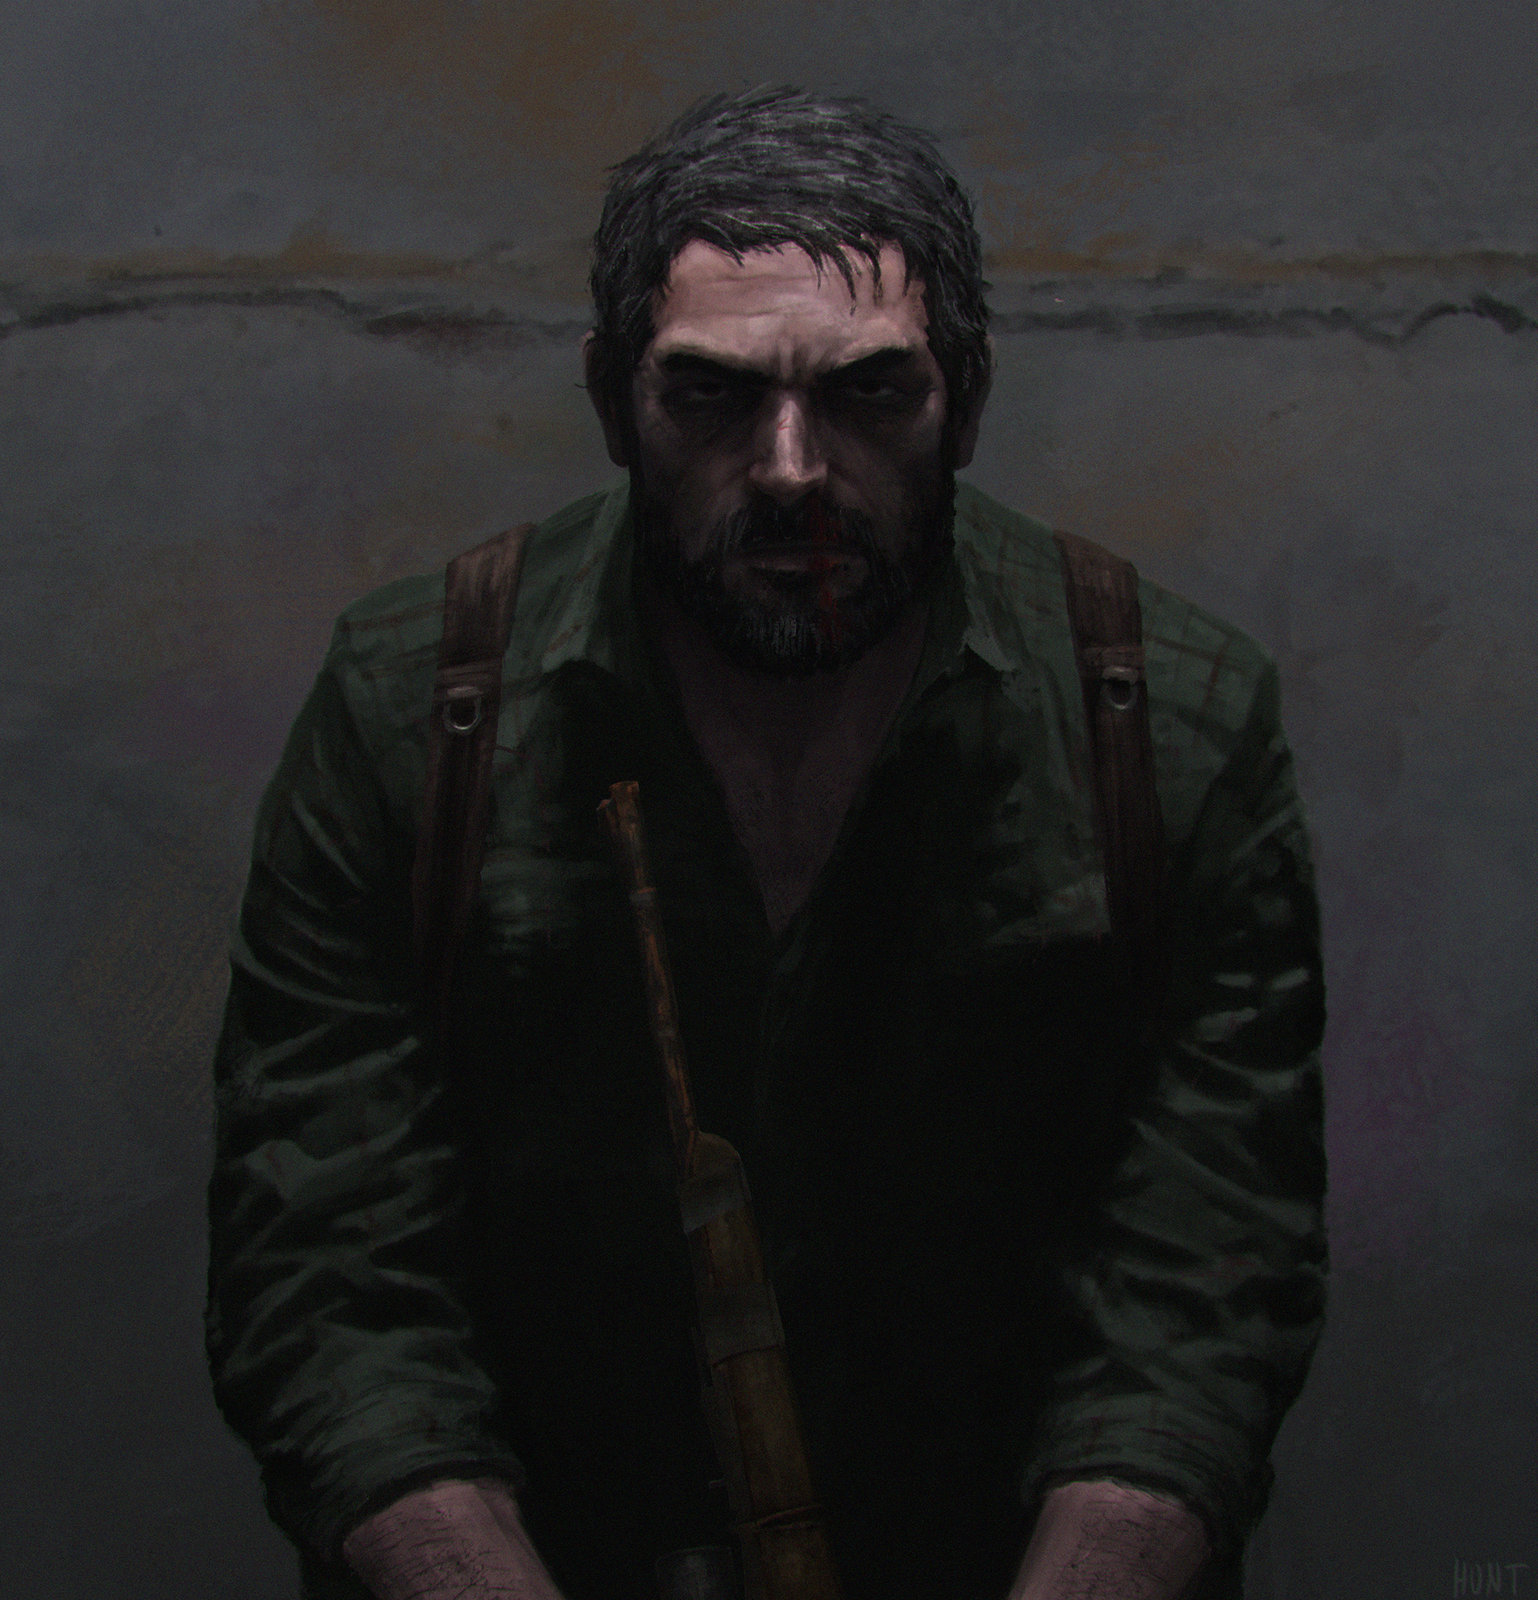 Joel from the Last of Us